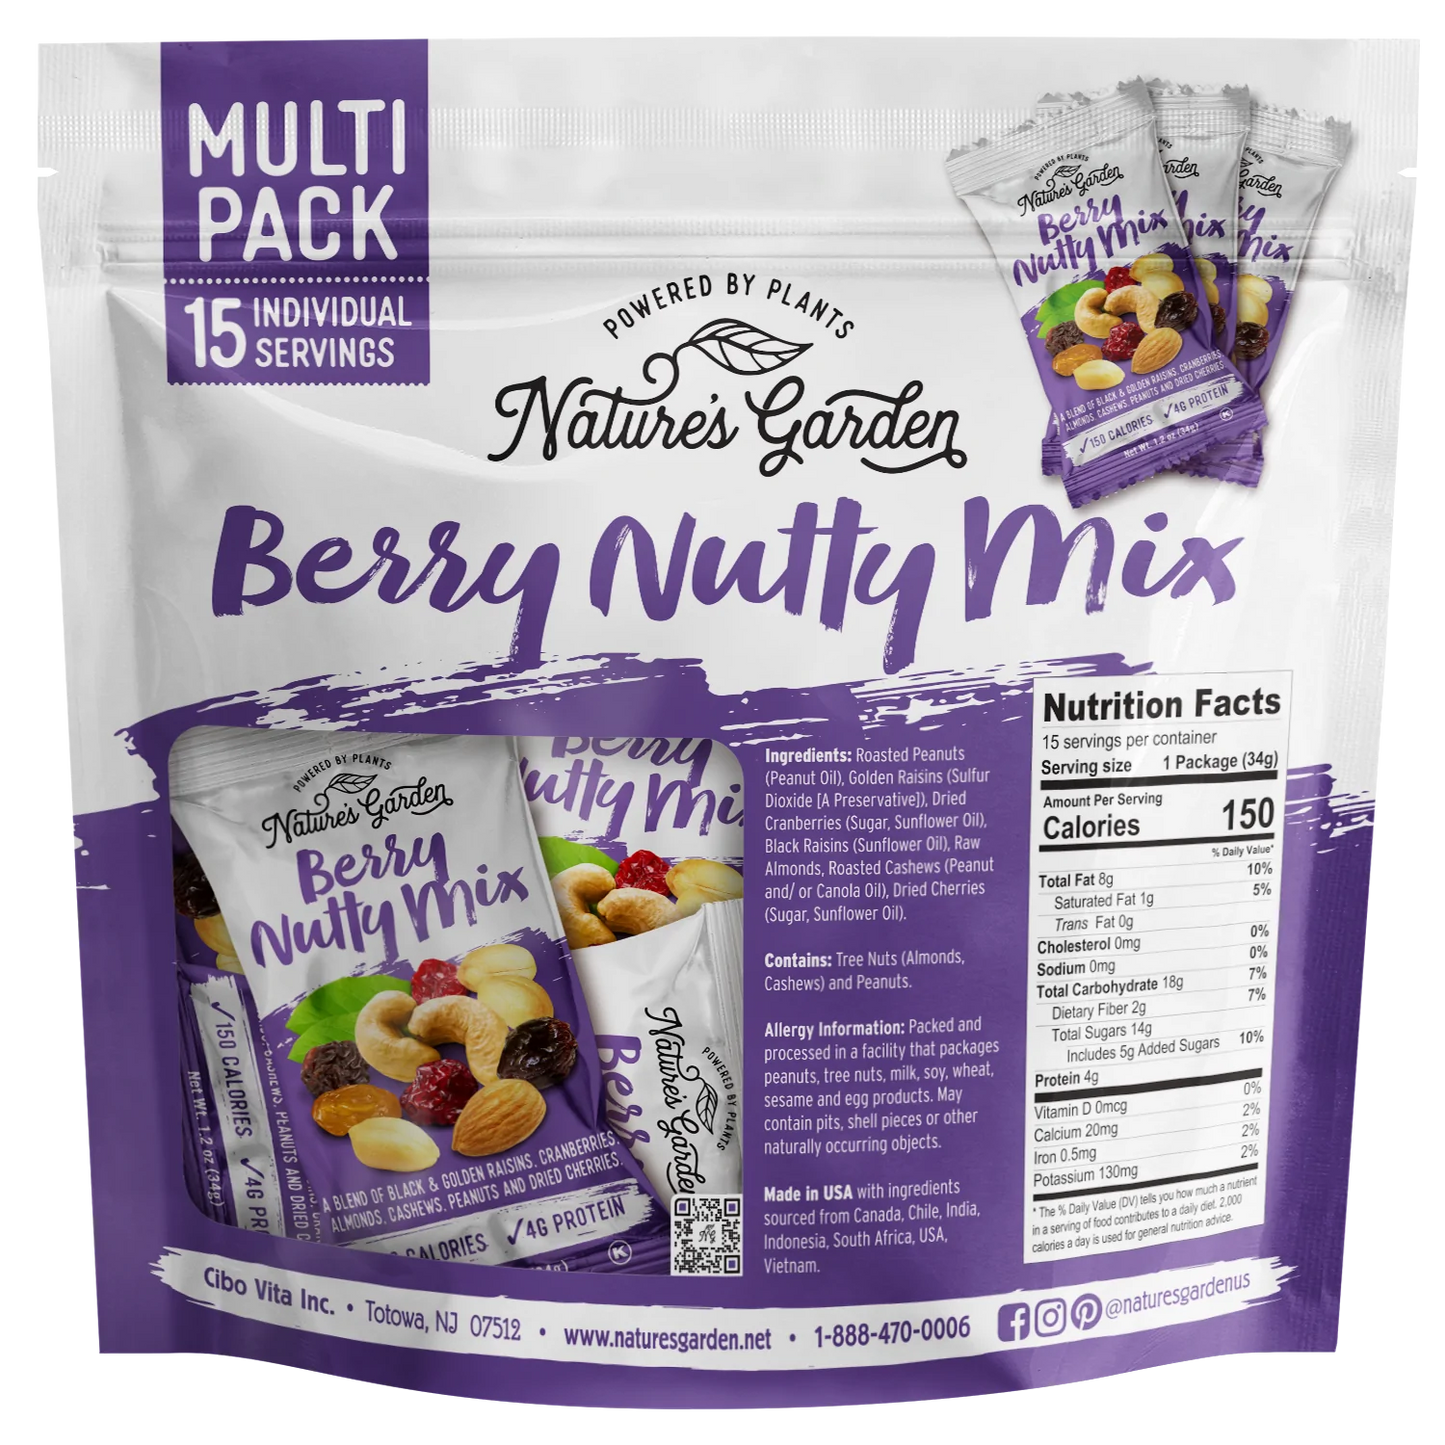 Nature's Garden Berry Nutty Mix